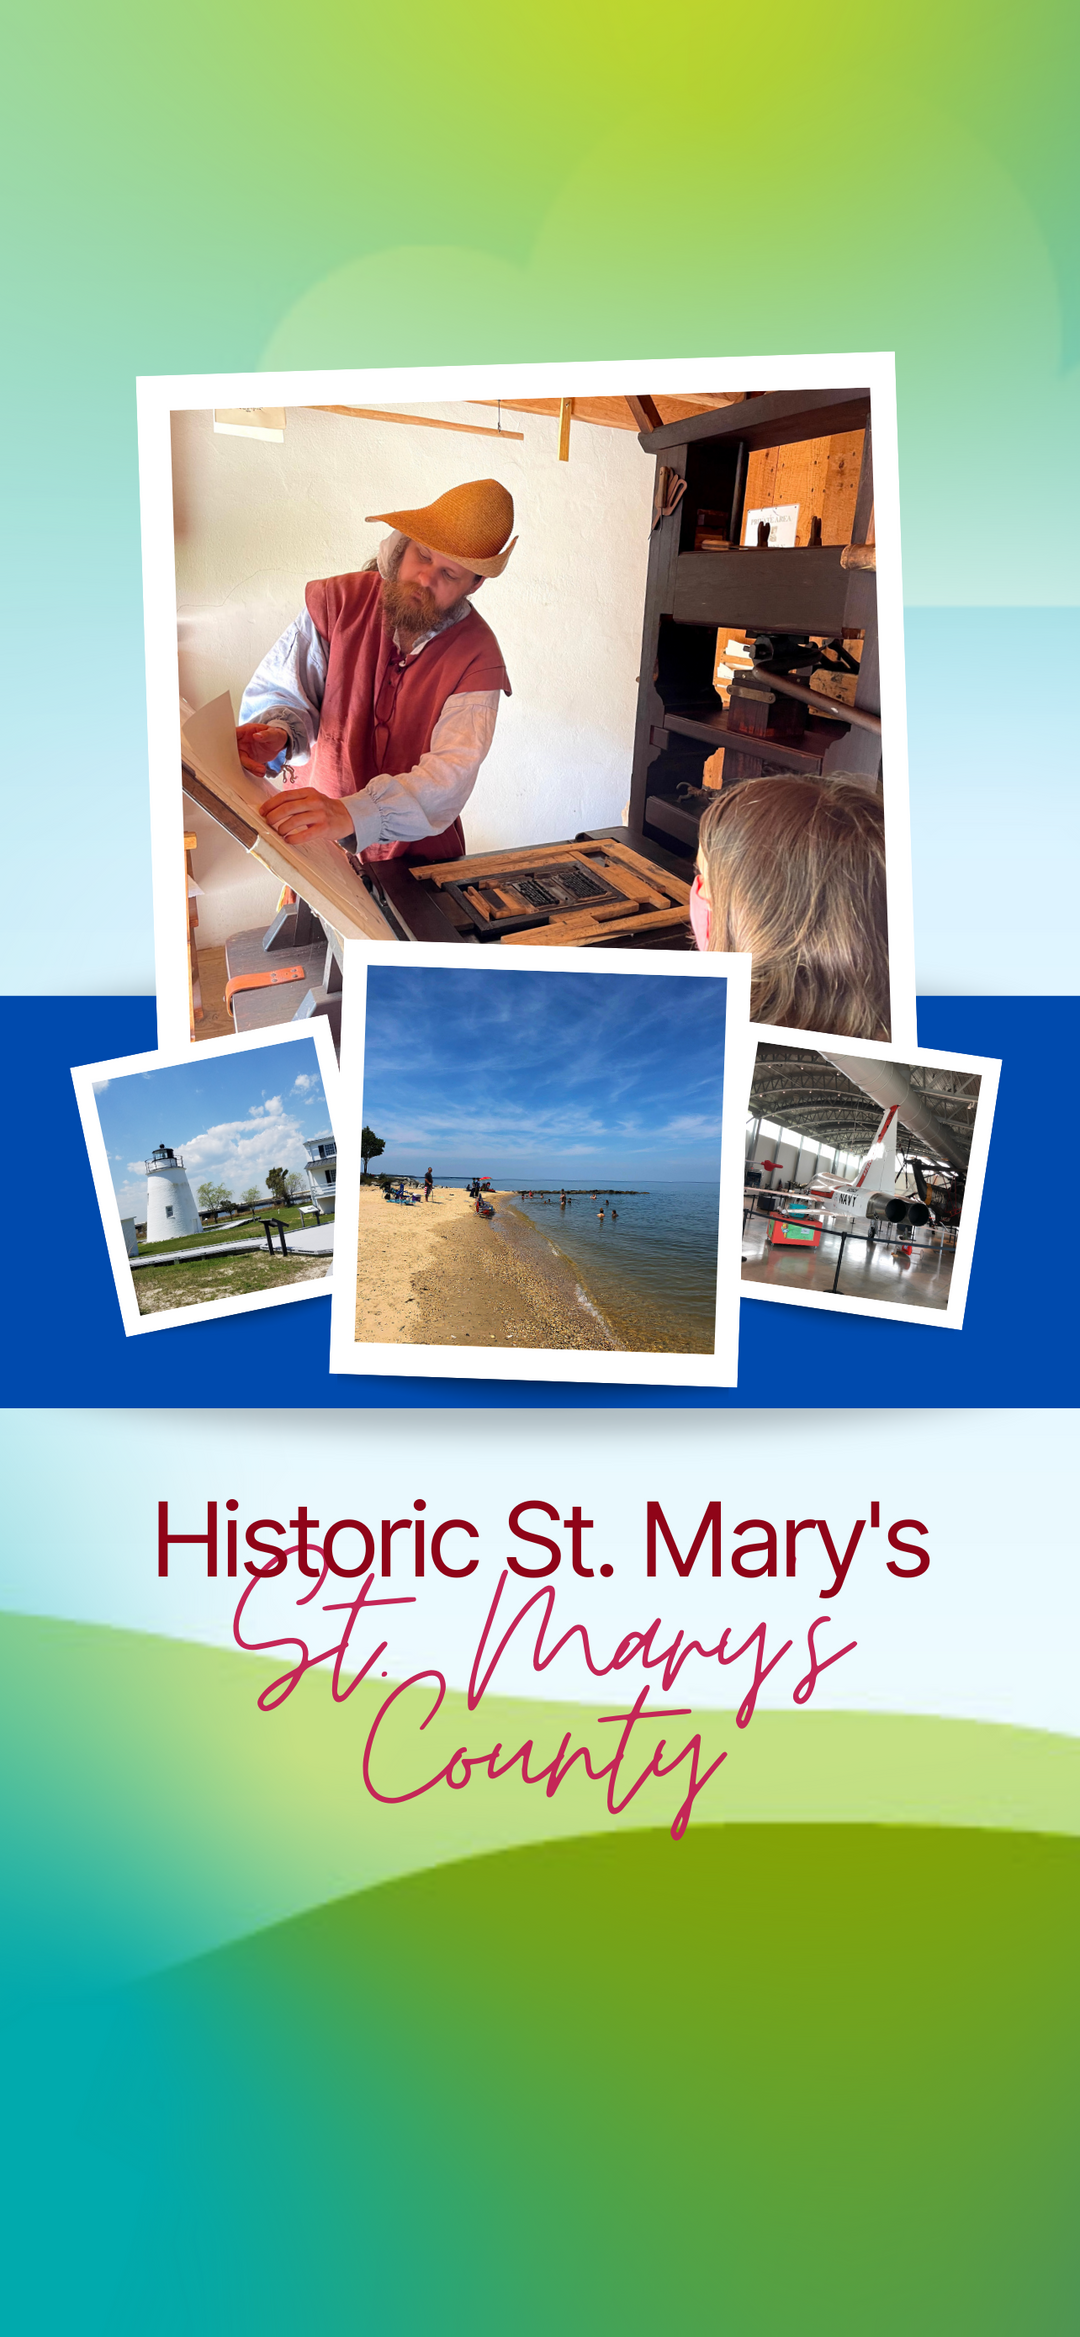 Historic St. Mary's Day Trip Itinerary